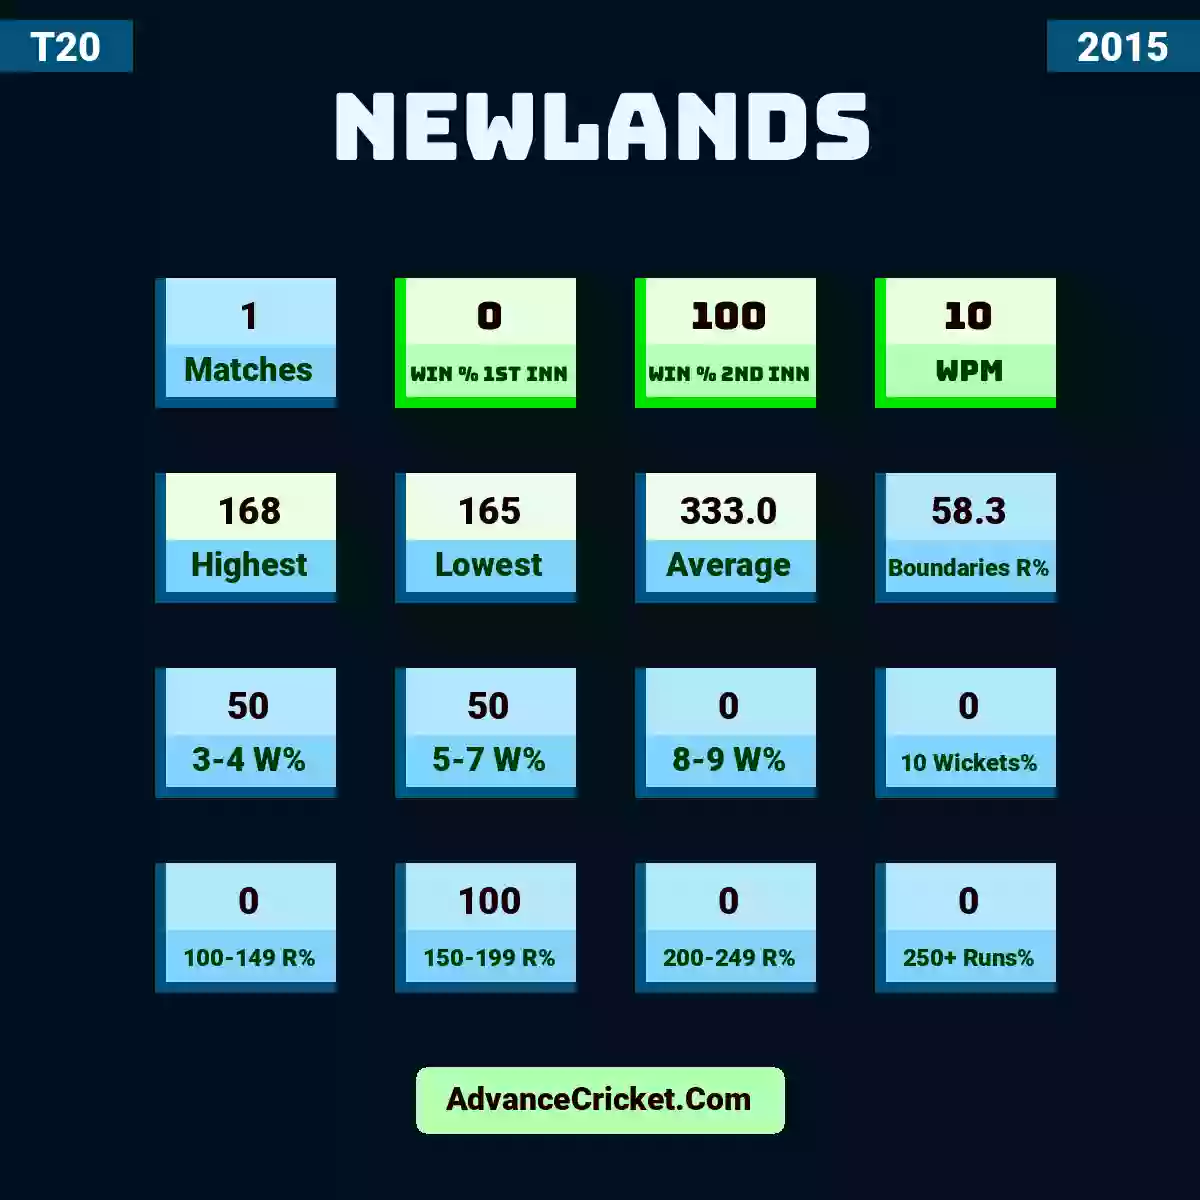 Image showing Newlands with Matches: 1, Win % 1st Inn: 0, Win % 2nd Inn: 100, WPM: 10, Highest: 168, Lowest: 165, Average: 333.0, Boundaries R%: 58.3, 3-4 W%: 50, 5-7 W%: 50, 8-9 W%: 0, 10 Wickets%: 0, 100-149 R%: 0, 150-199 R%: 100, 200-249 R%: 0, 250+ Runs%: 0.